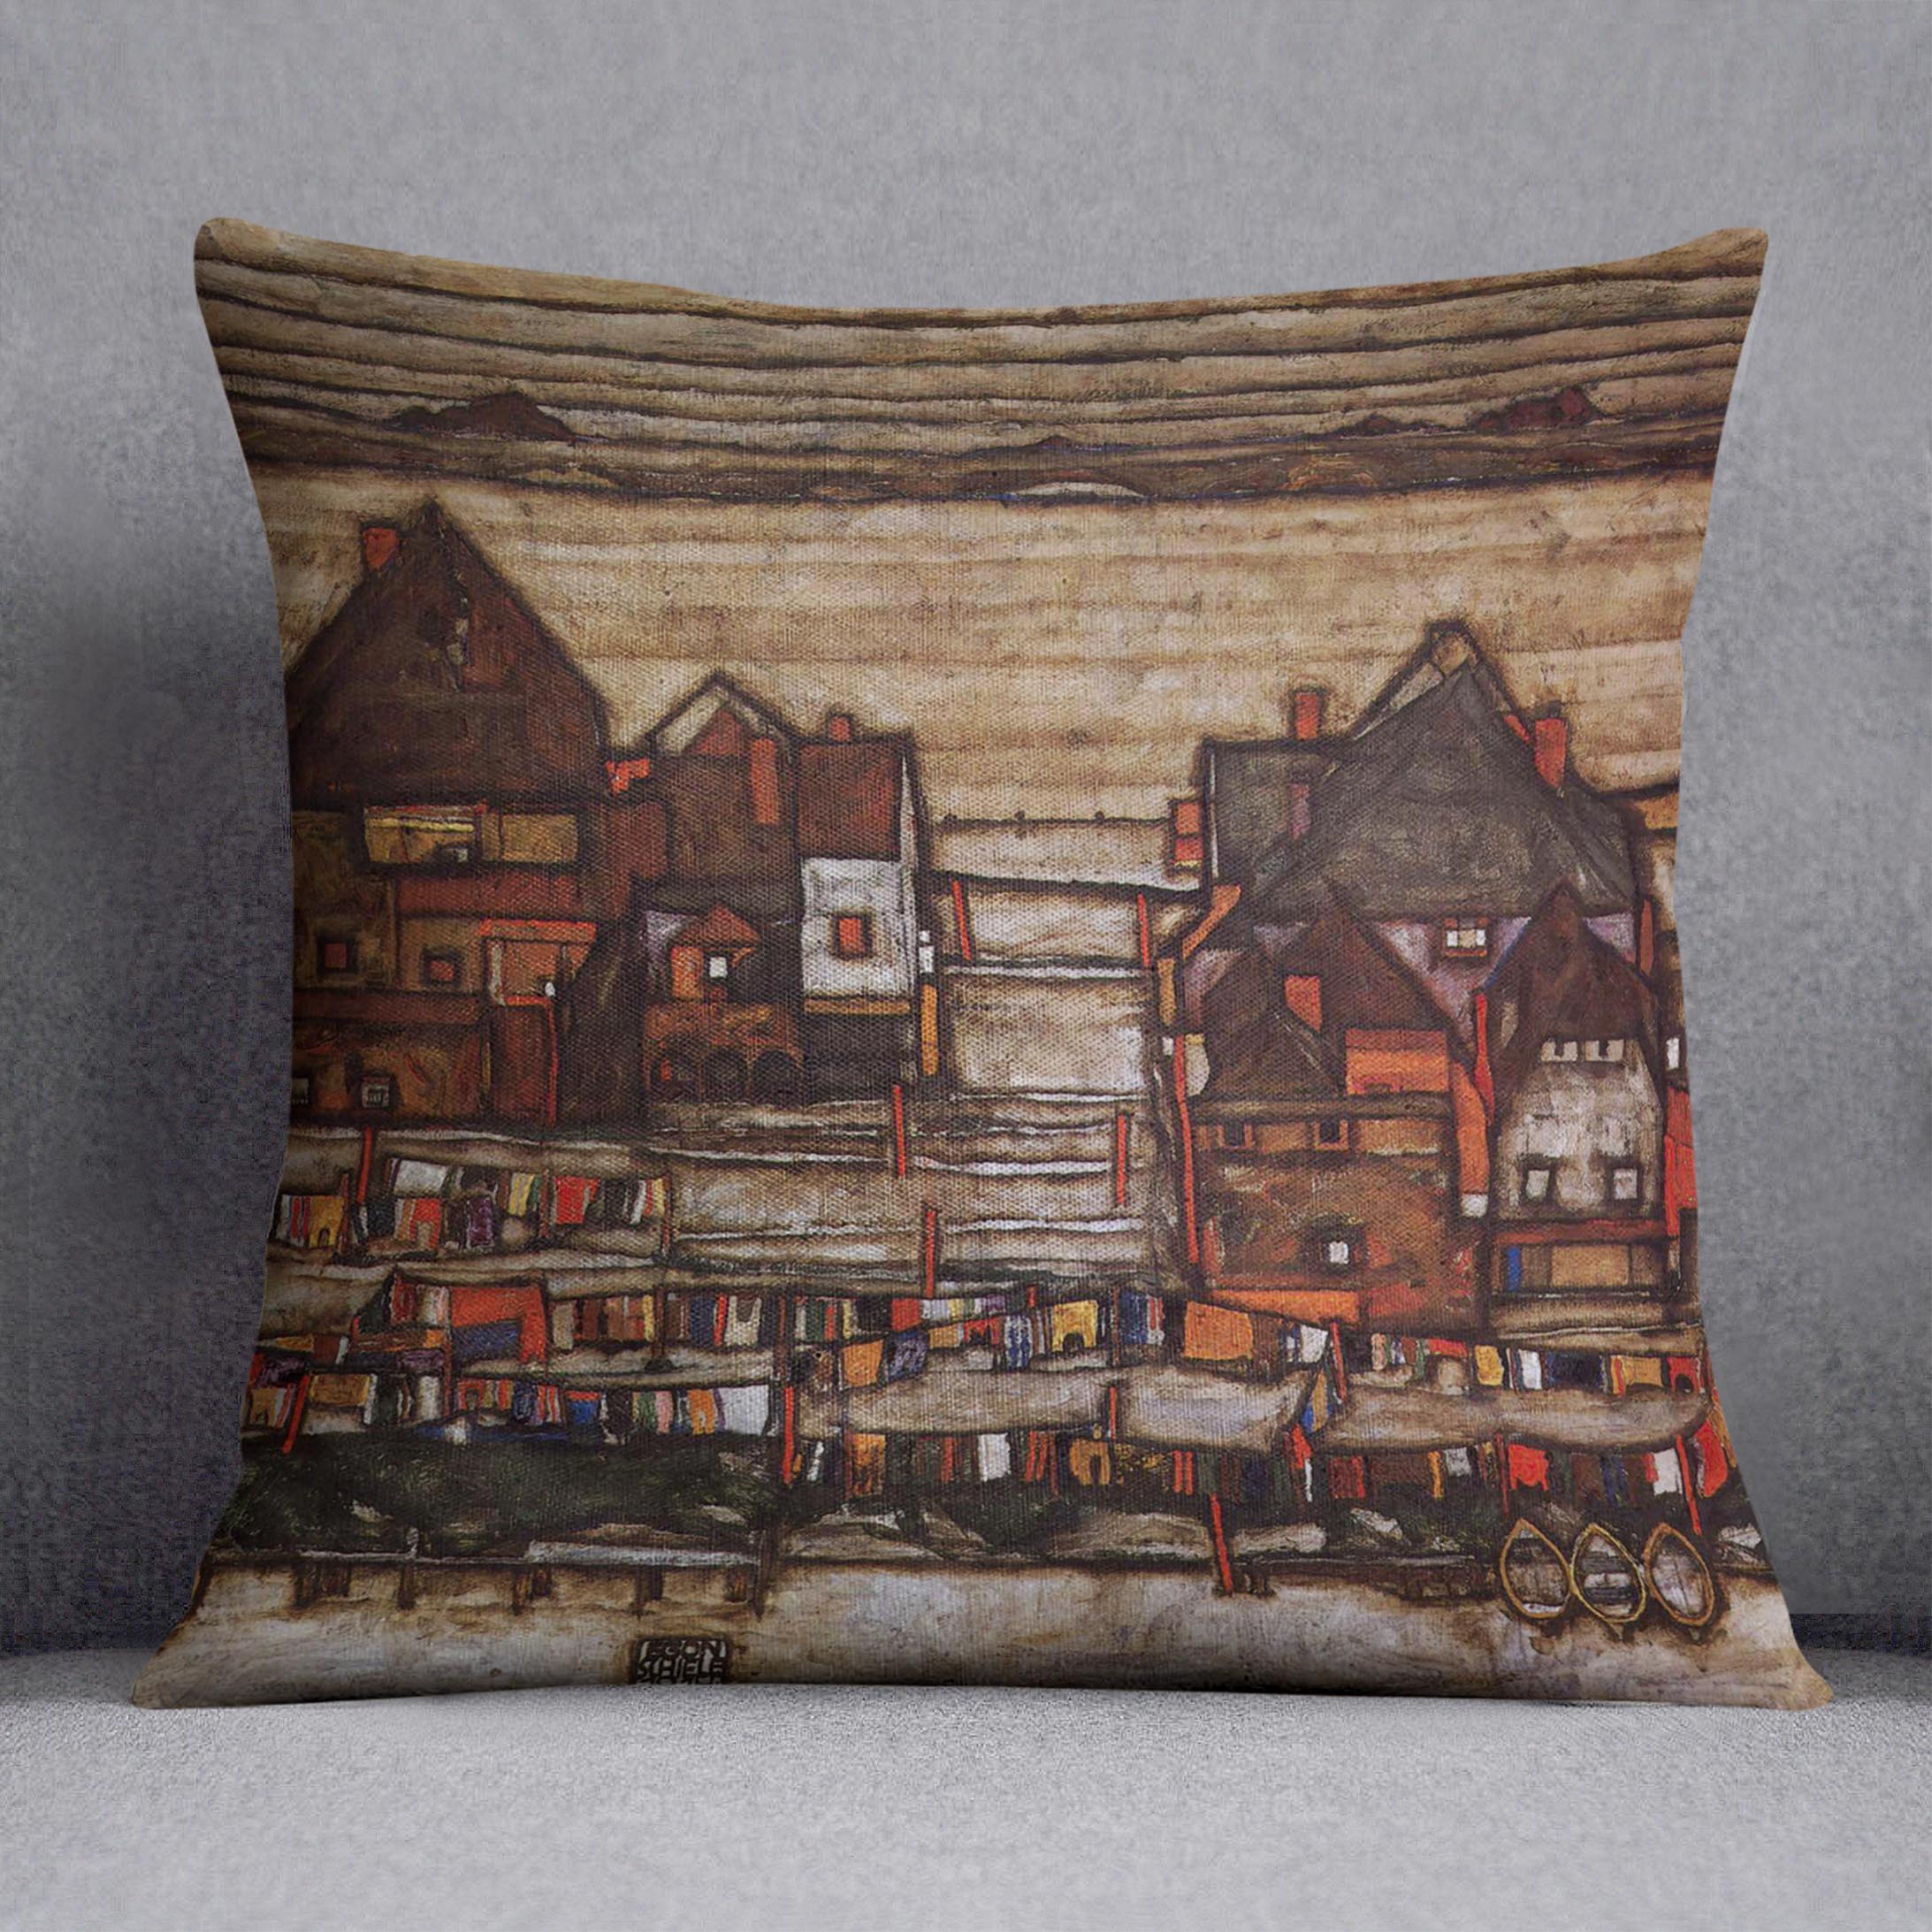 Houses with laundry lines and suburban by Egon Schiele Cushion